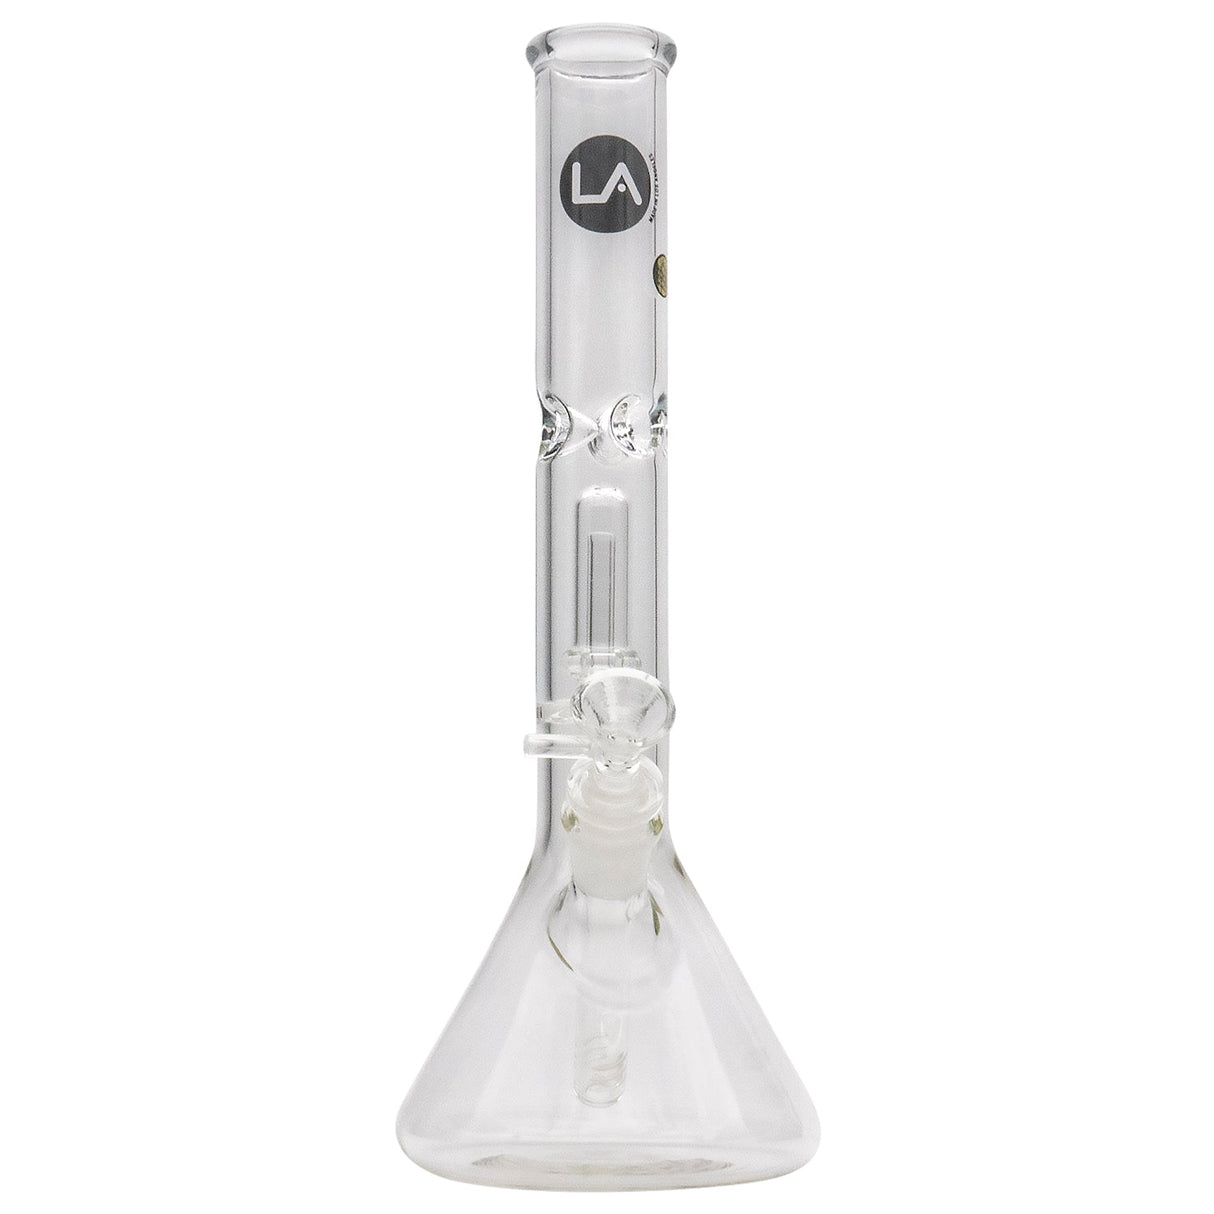 LA Pipes Beaker Bong with Single Showerhead Perc, 45 Degree Joint, Front View on White